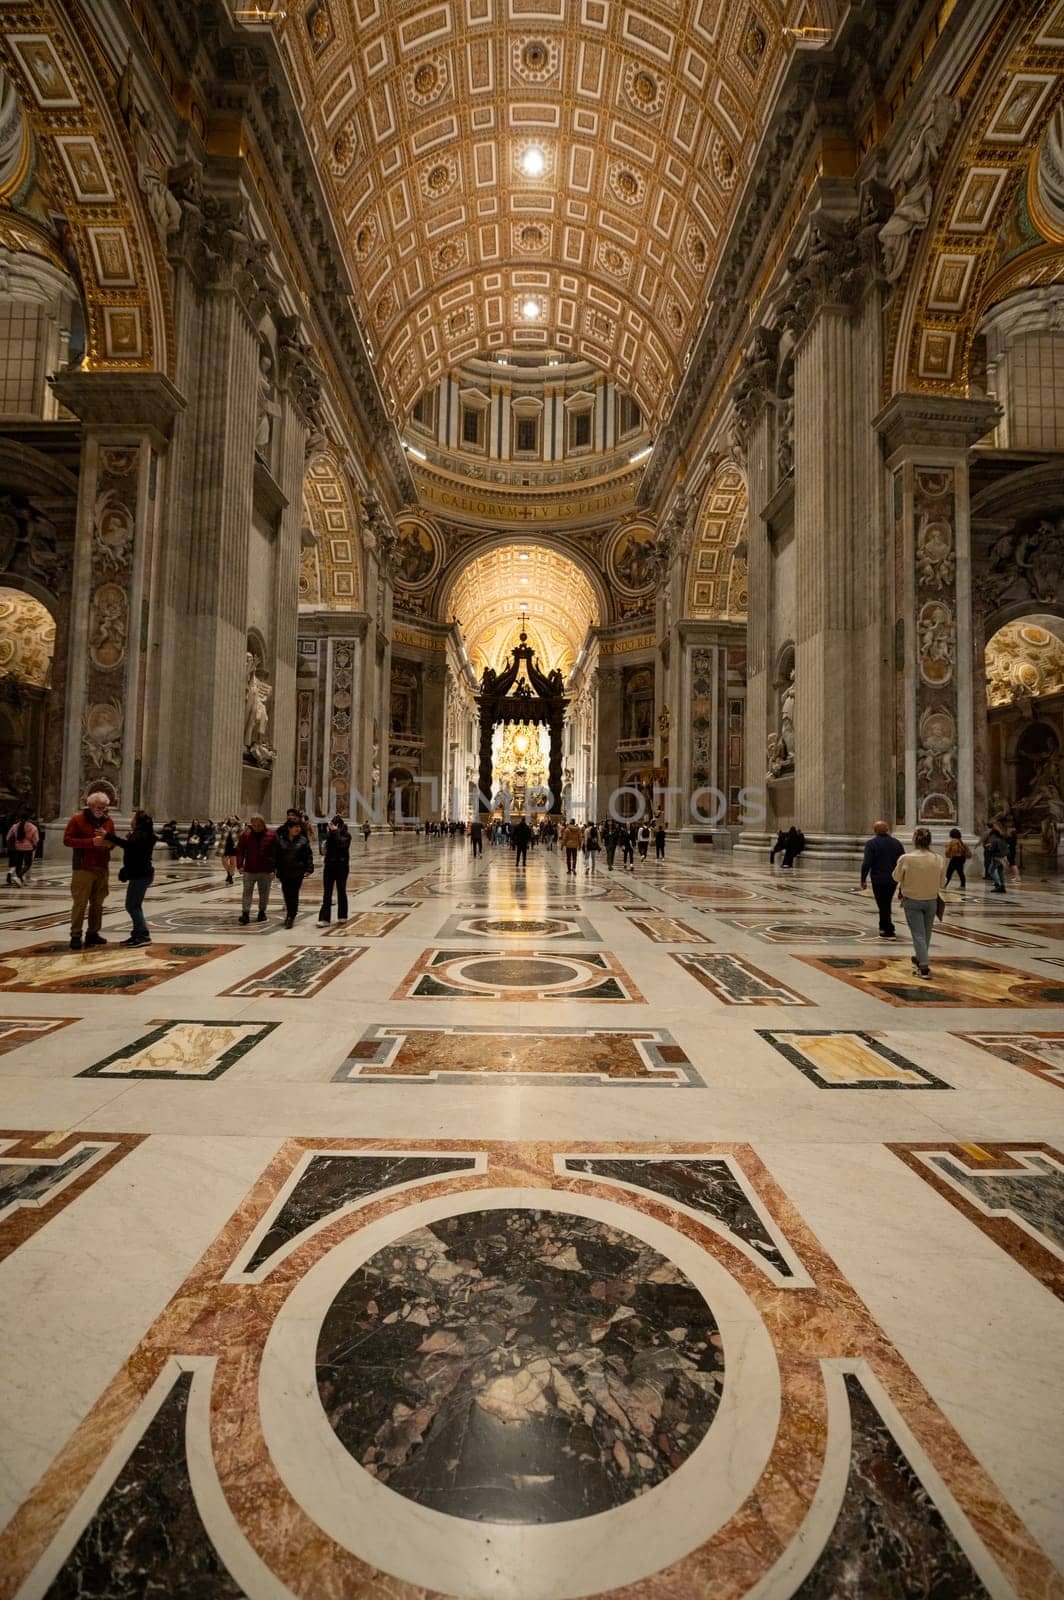 Inside St. Peter's Basilica, Rome, Italy. St. Peter's Cathedral is the main symbol of Rome and Vatican City. Ornate baroque interior of St. Peter's Church, famous luxury St. Peter's Basilica. Rome. by martinscphoto